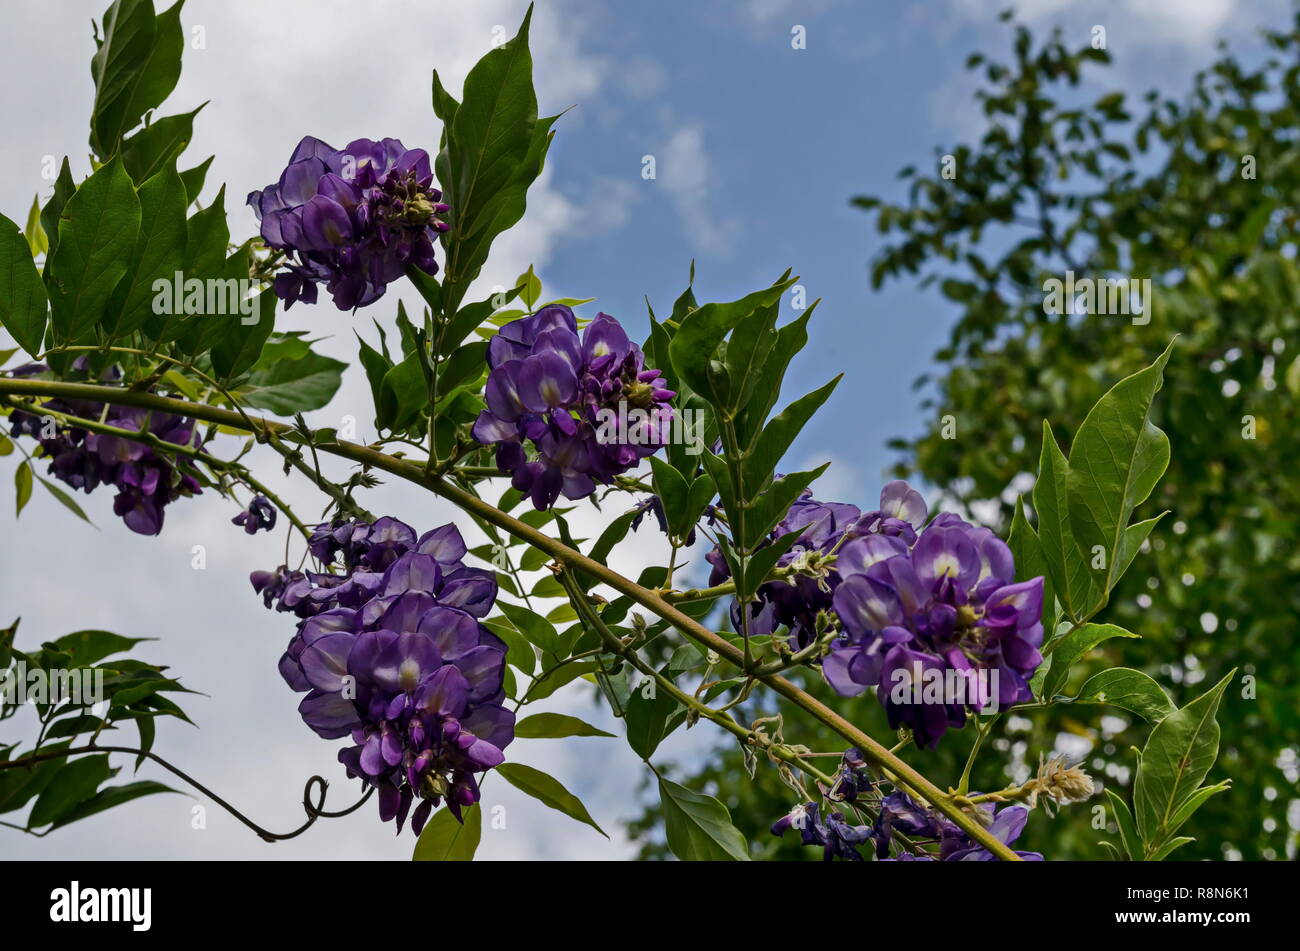 Branch with bunch purple bloom and leaf of wisteria tree in garden, Sofia, Bulgaria Stock Photo